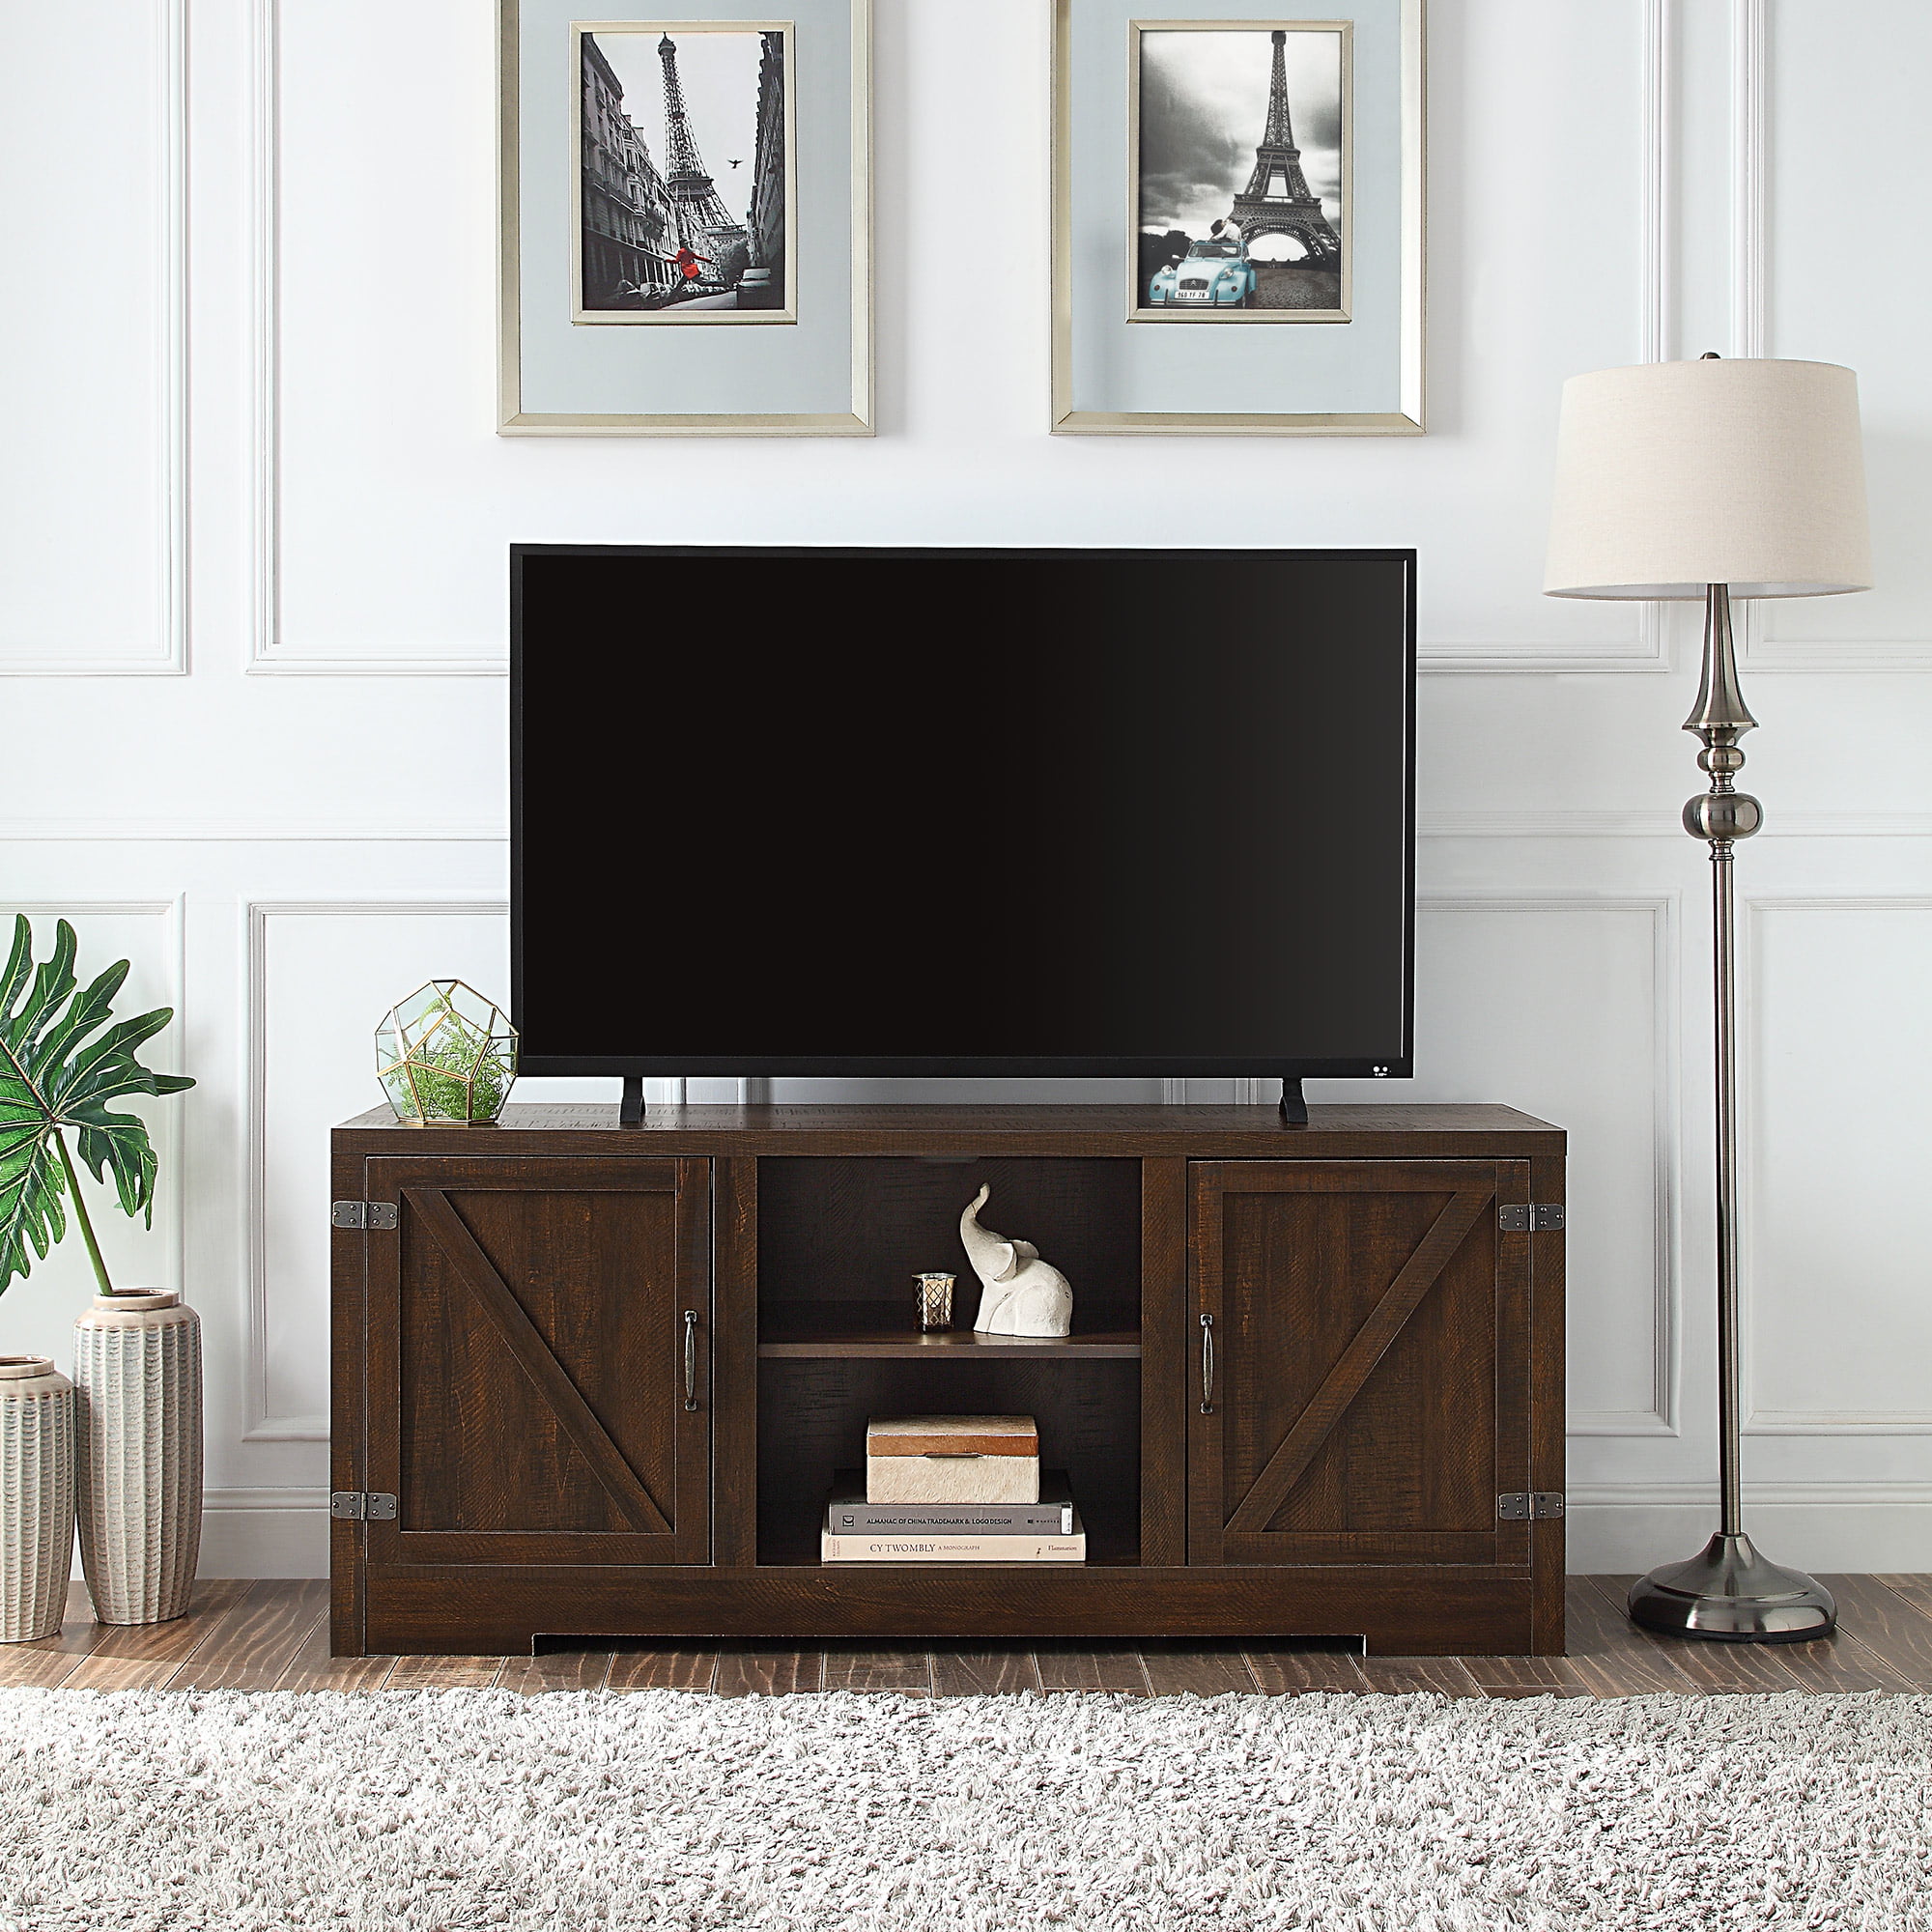 BELLEZE Hilo 58 Inch Barn Door TV Stand Console For TVs Up To 65